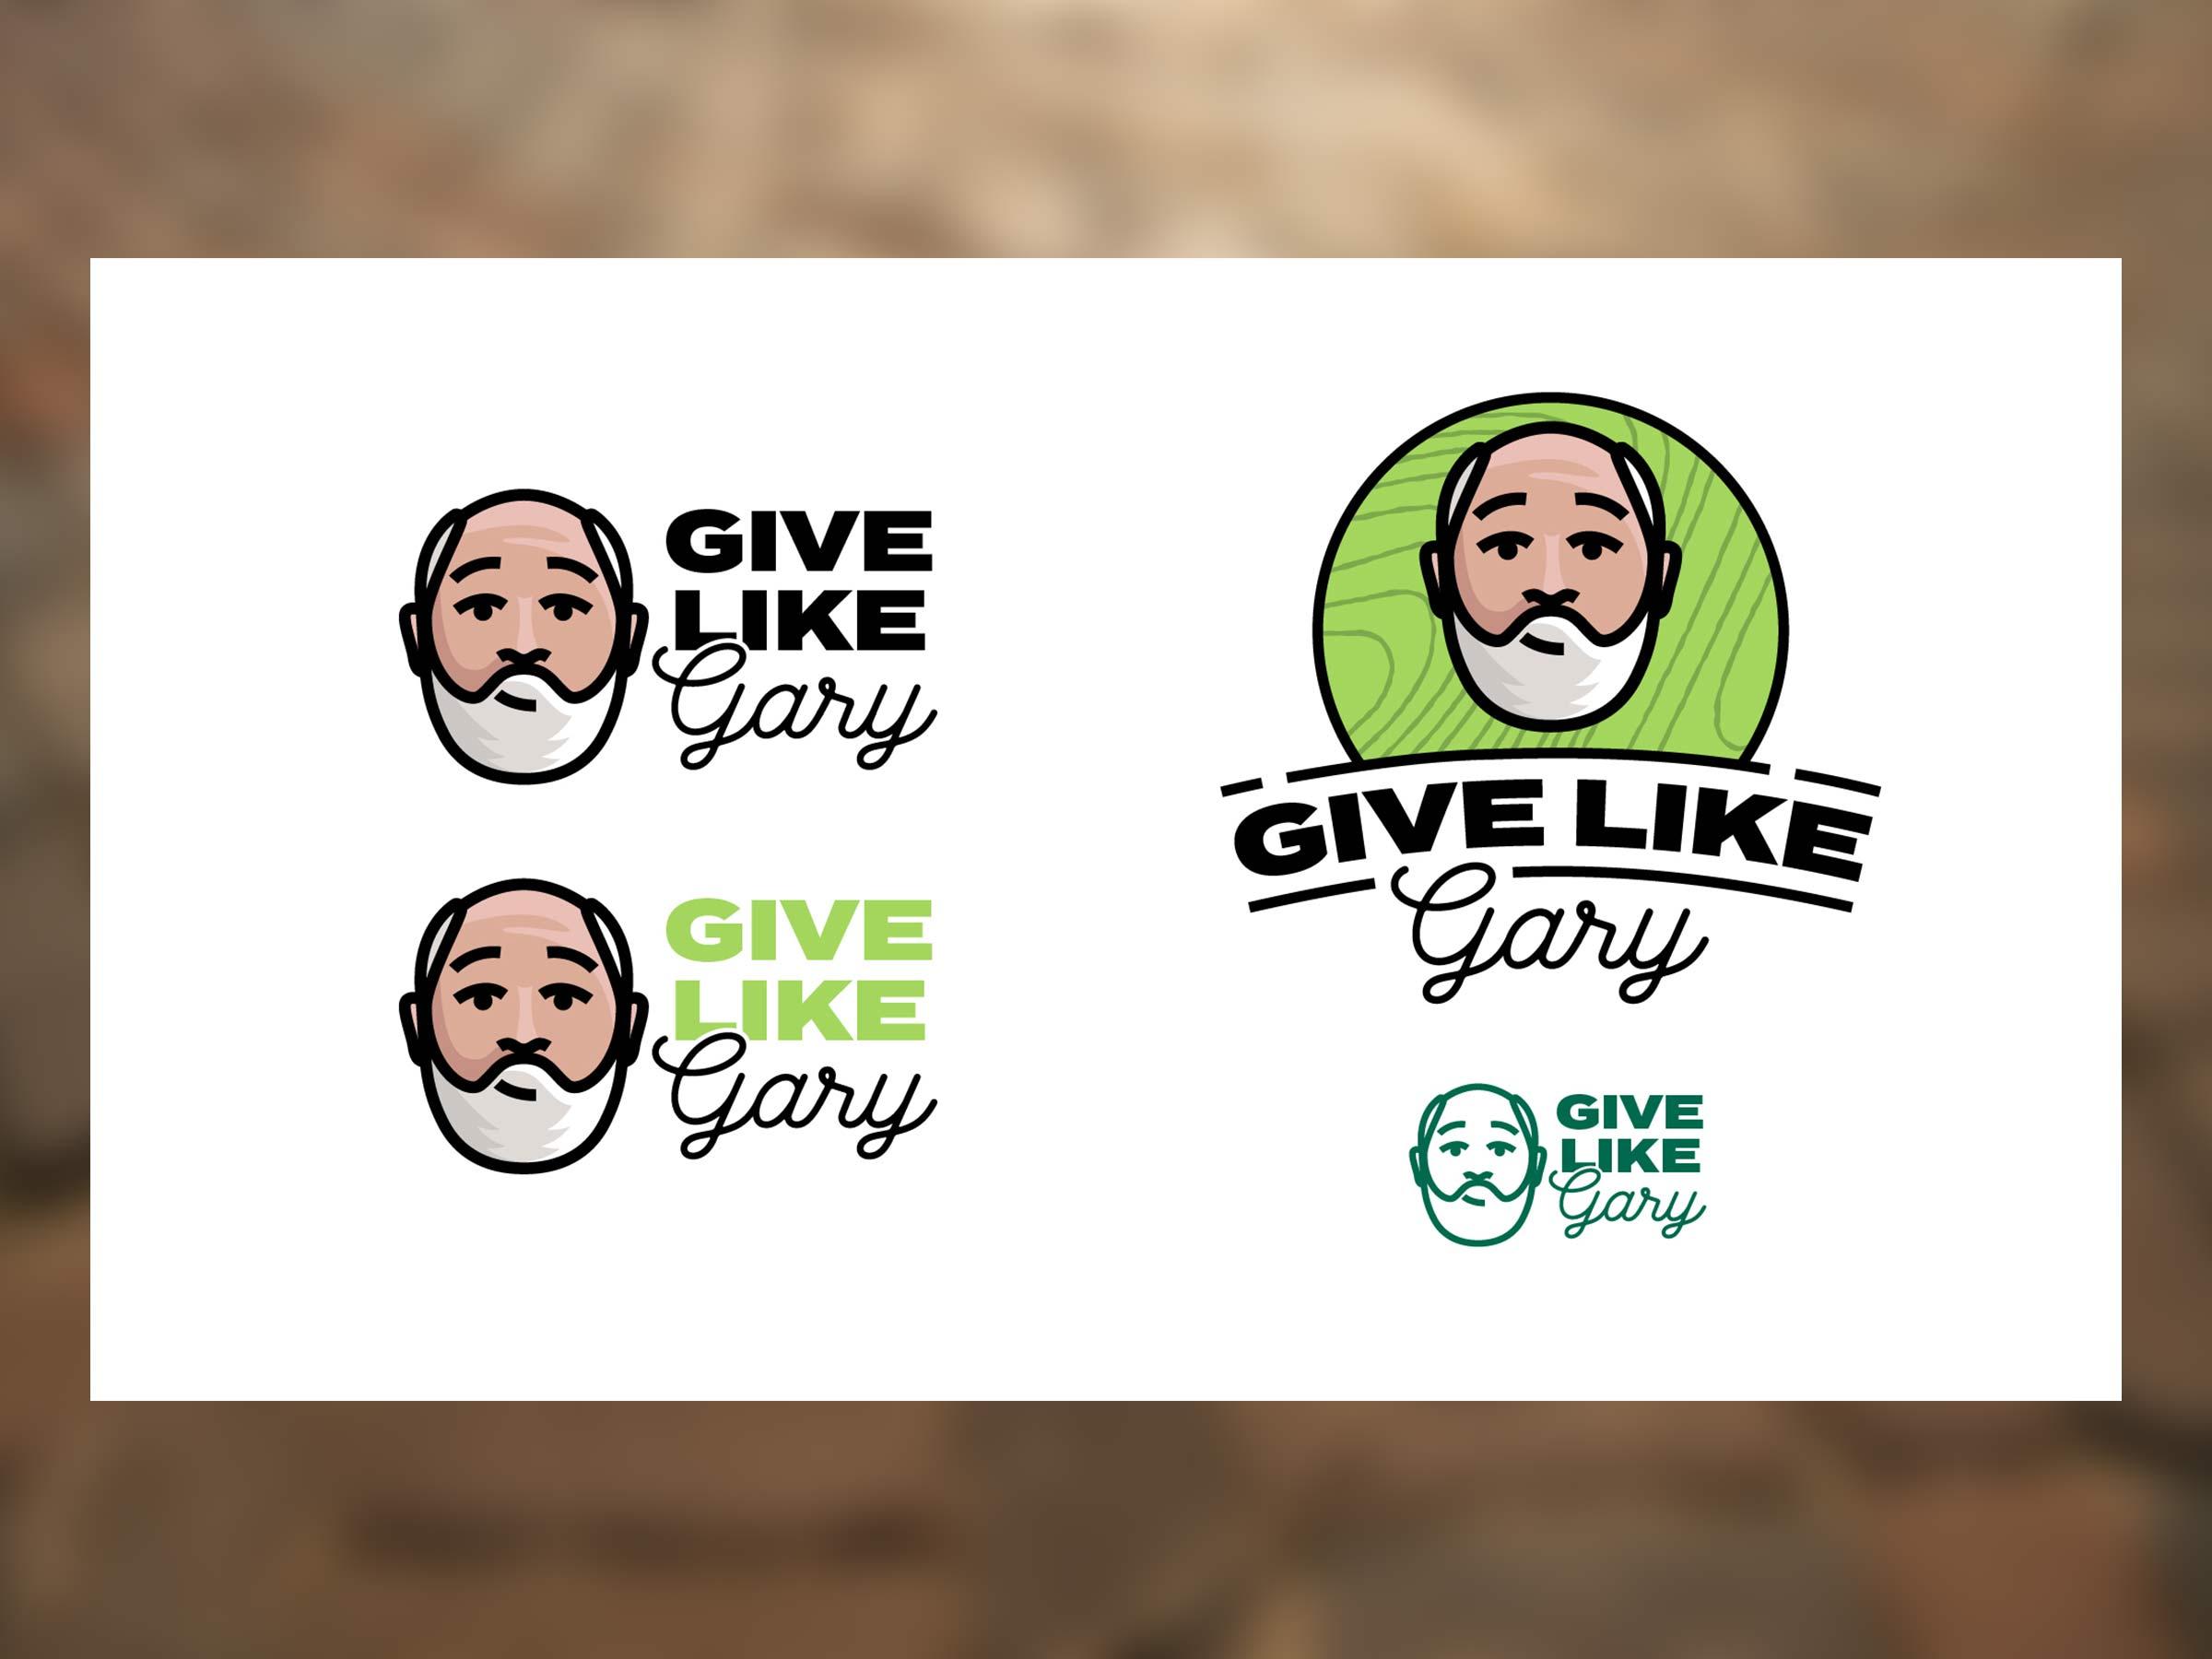 Logo illustrations for Give Like Gary Project